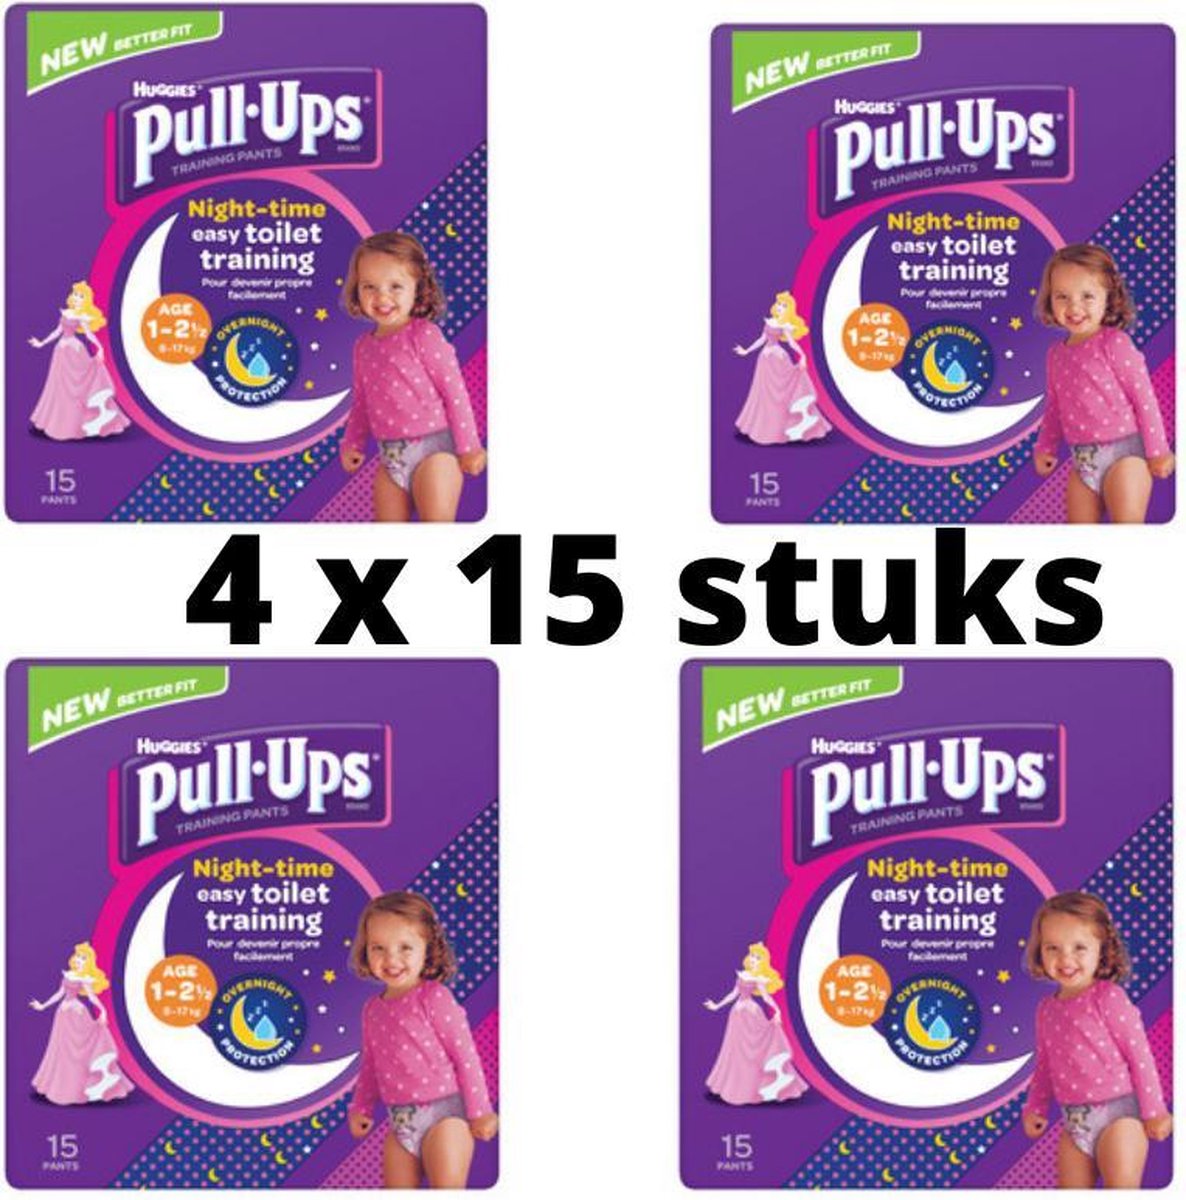 HUGGIES Pull-ups couches culottes absorbantes fille 1,5 à 3 ans